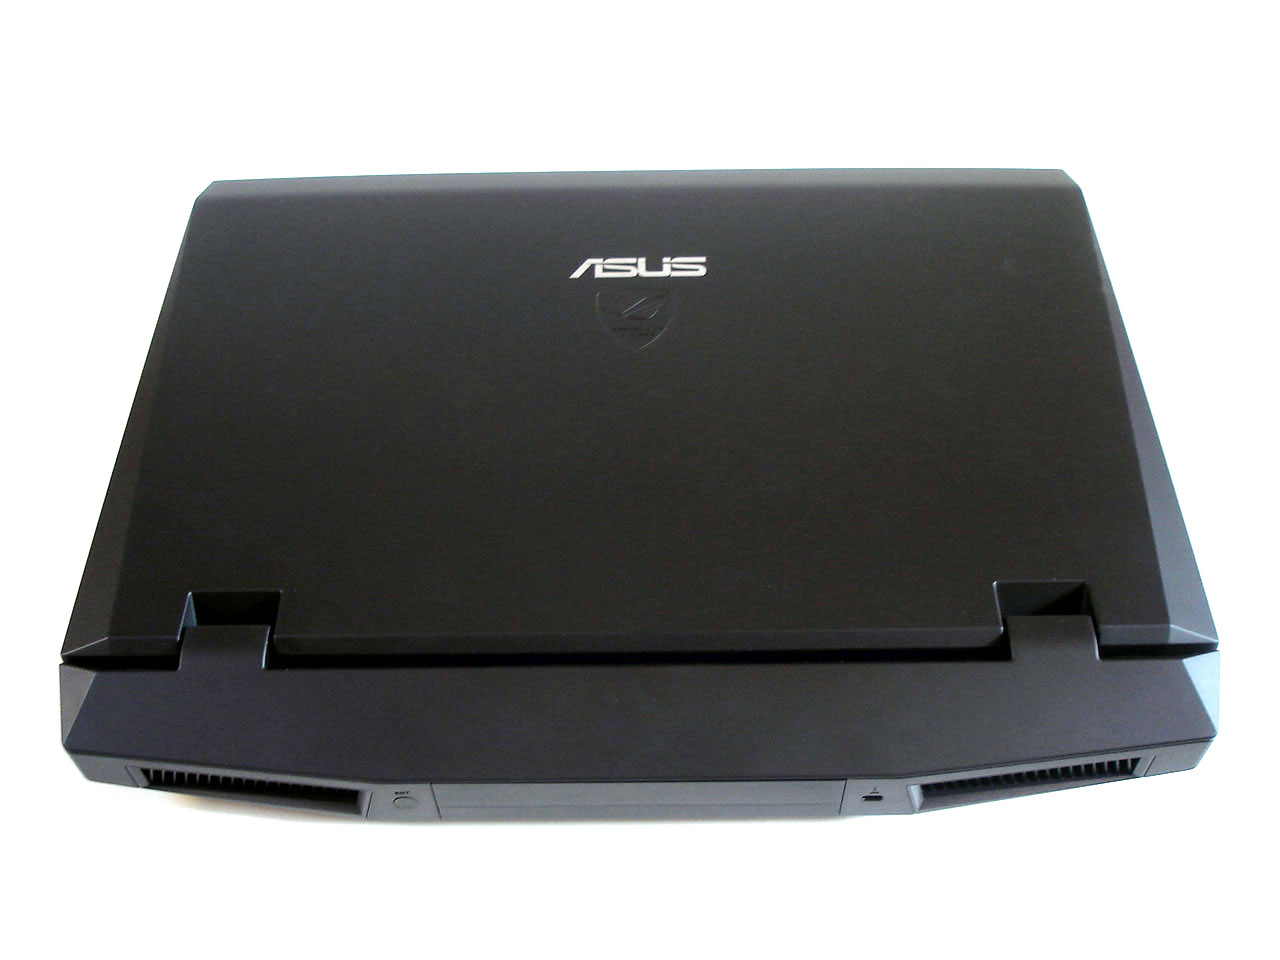 Asus m3np driver for macbook pro